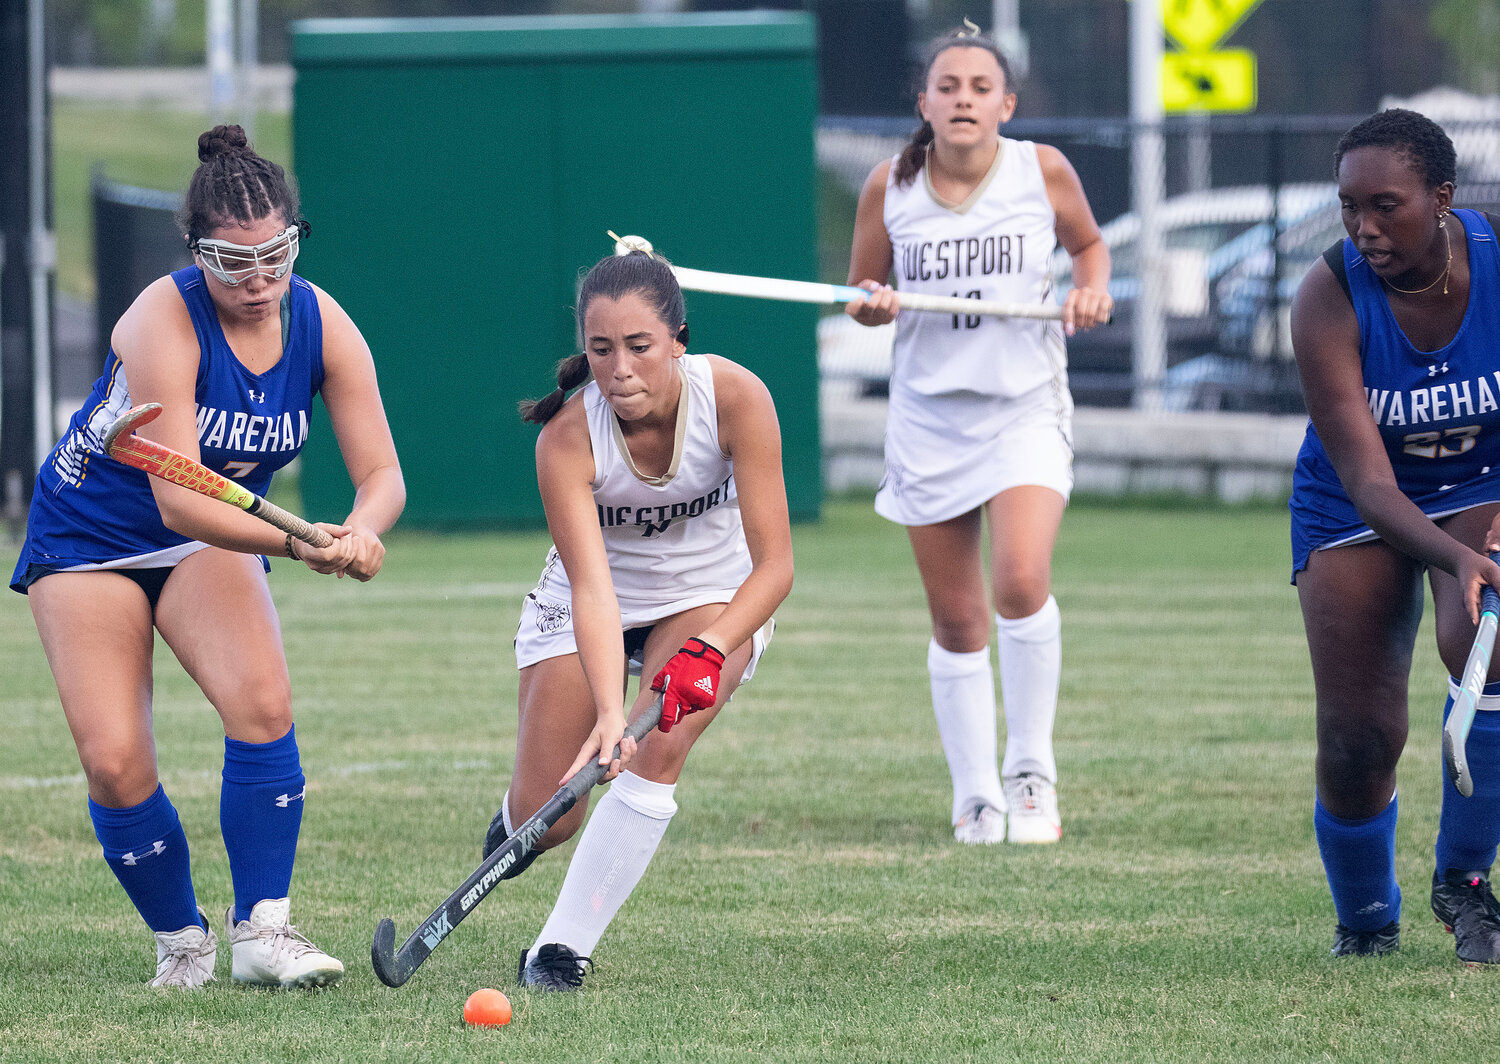 Wildcats’s senior captain Avery Avila leads the team with her gritty, tenacious play on the field.